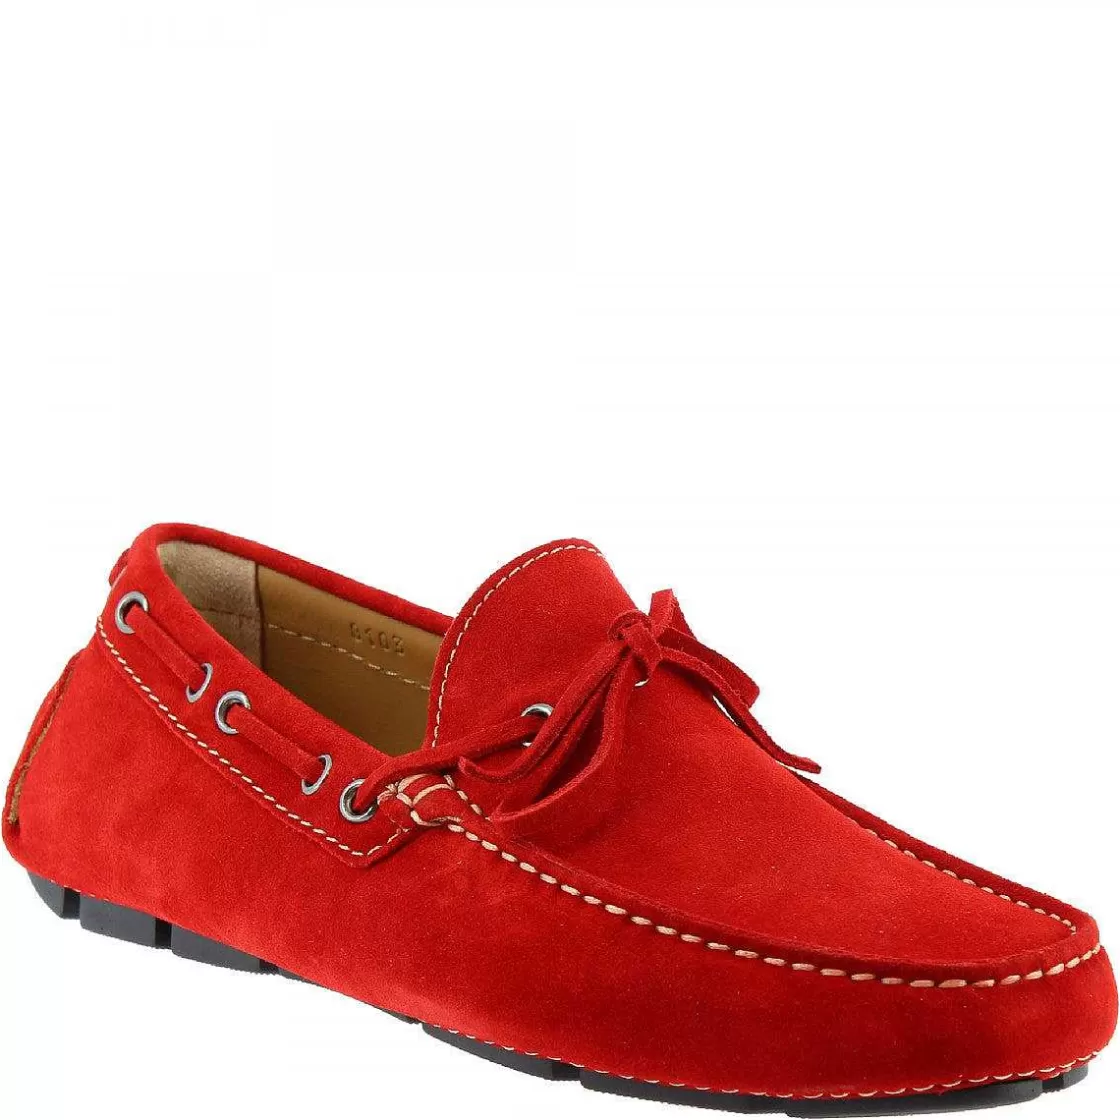 Leonardo Classic Boat Moccasins For Men Handmade In Red Suede Leather Discount